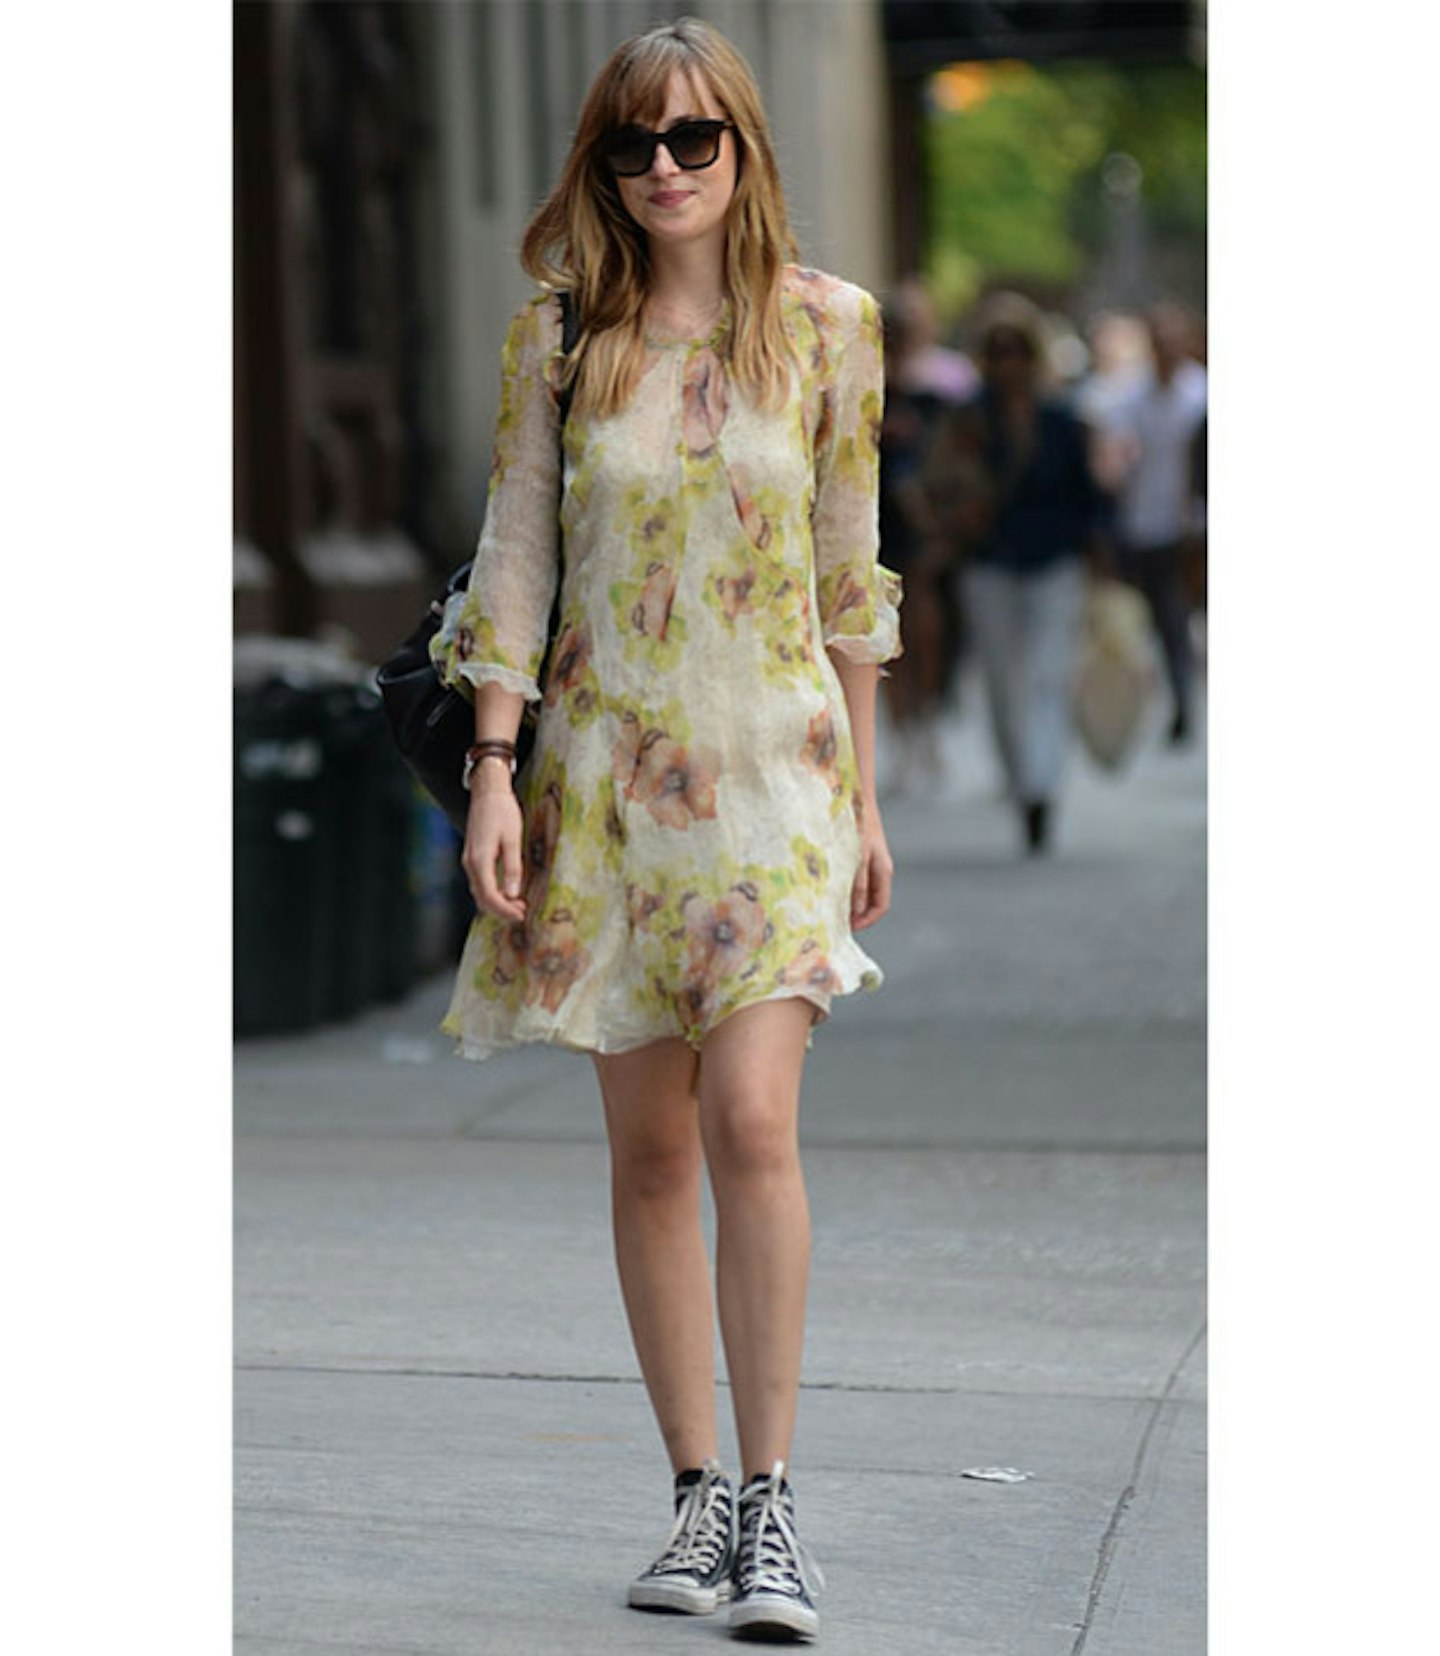 Perfectly dressing down her floral frock with scuffed Converse